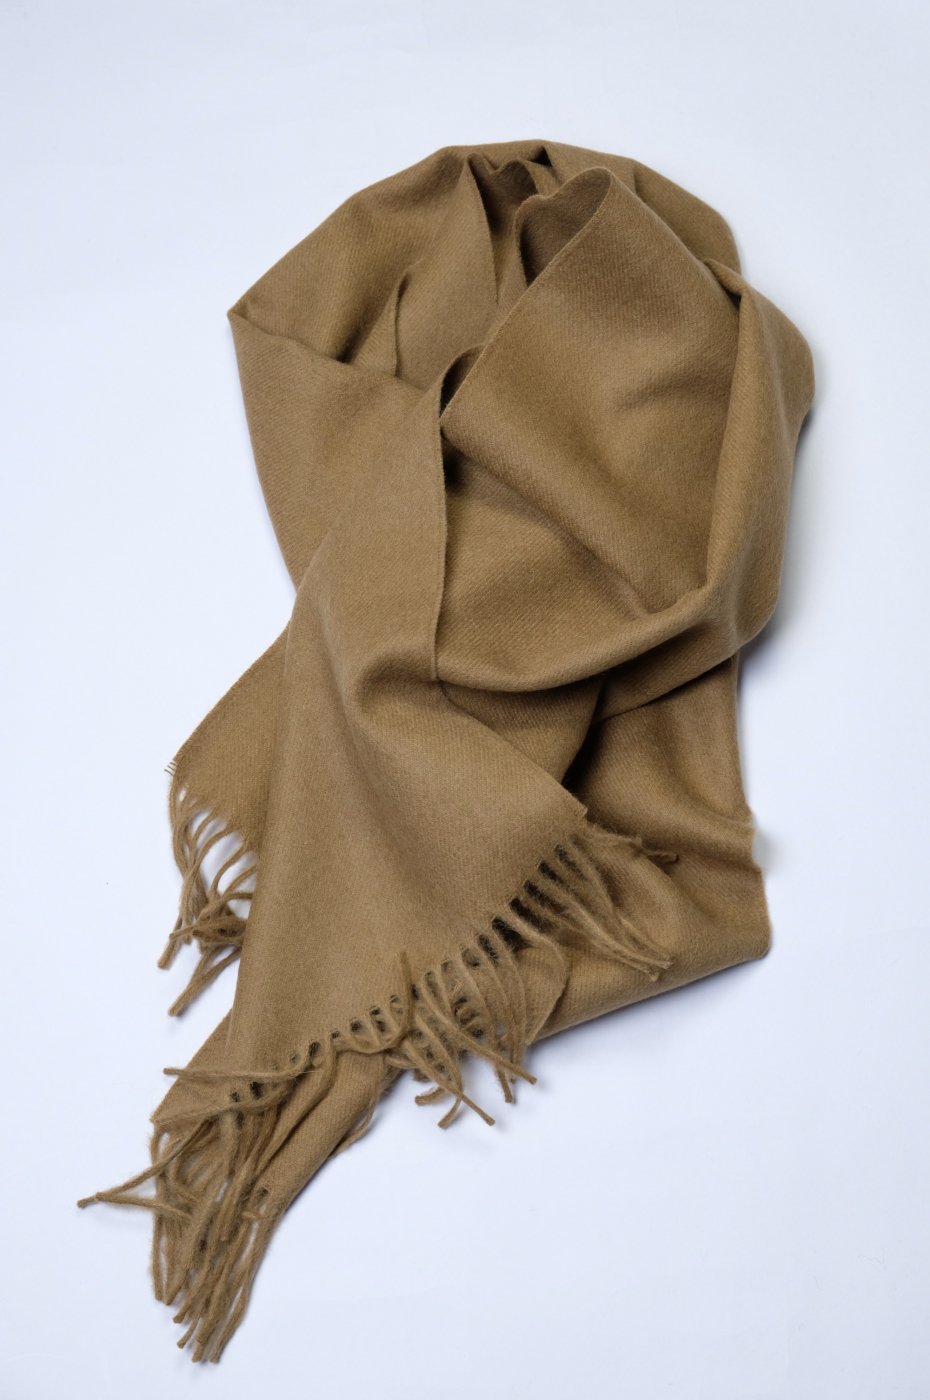 THE INOUE BROTHERS... "BRUSHED SCARF / CAMEL"